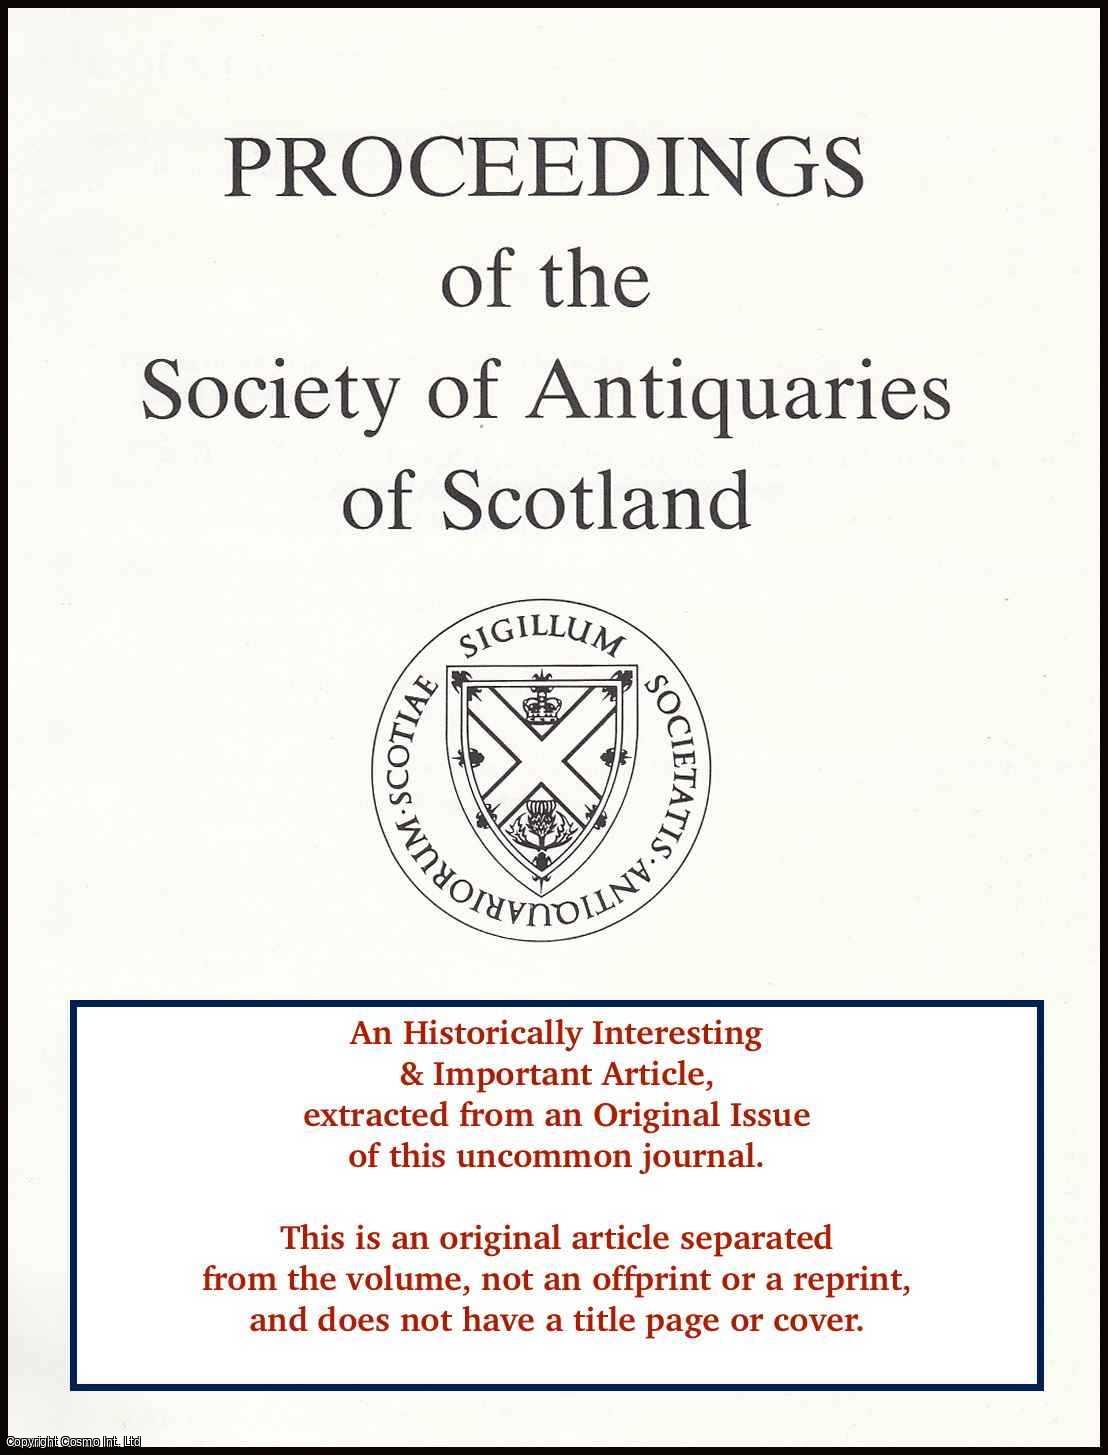 Alexander Hutcheson - A Cup and Ring-Marked Stone, and of Incised Stones Recently Discovered at Cargill, and of an Incised Boulder at Fowlis Wester. An original article from the Proceedings of the Society of Antiquaries of Scotland, 1883-84.